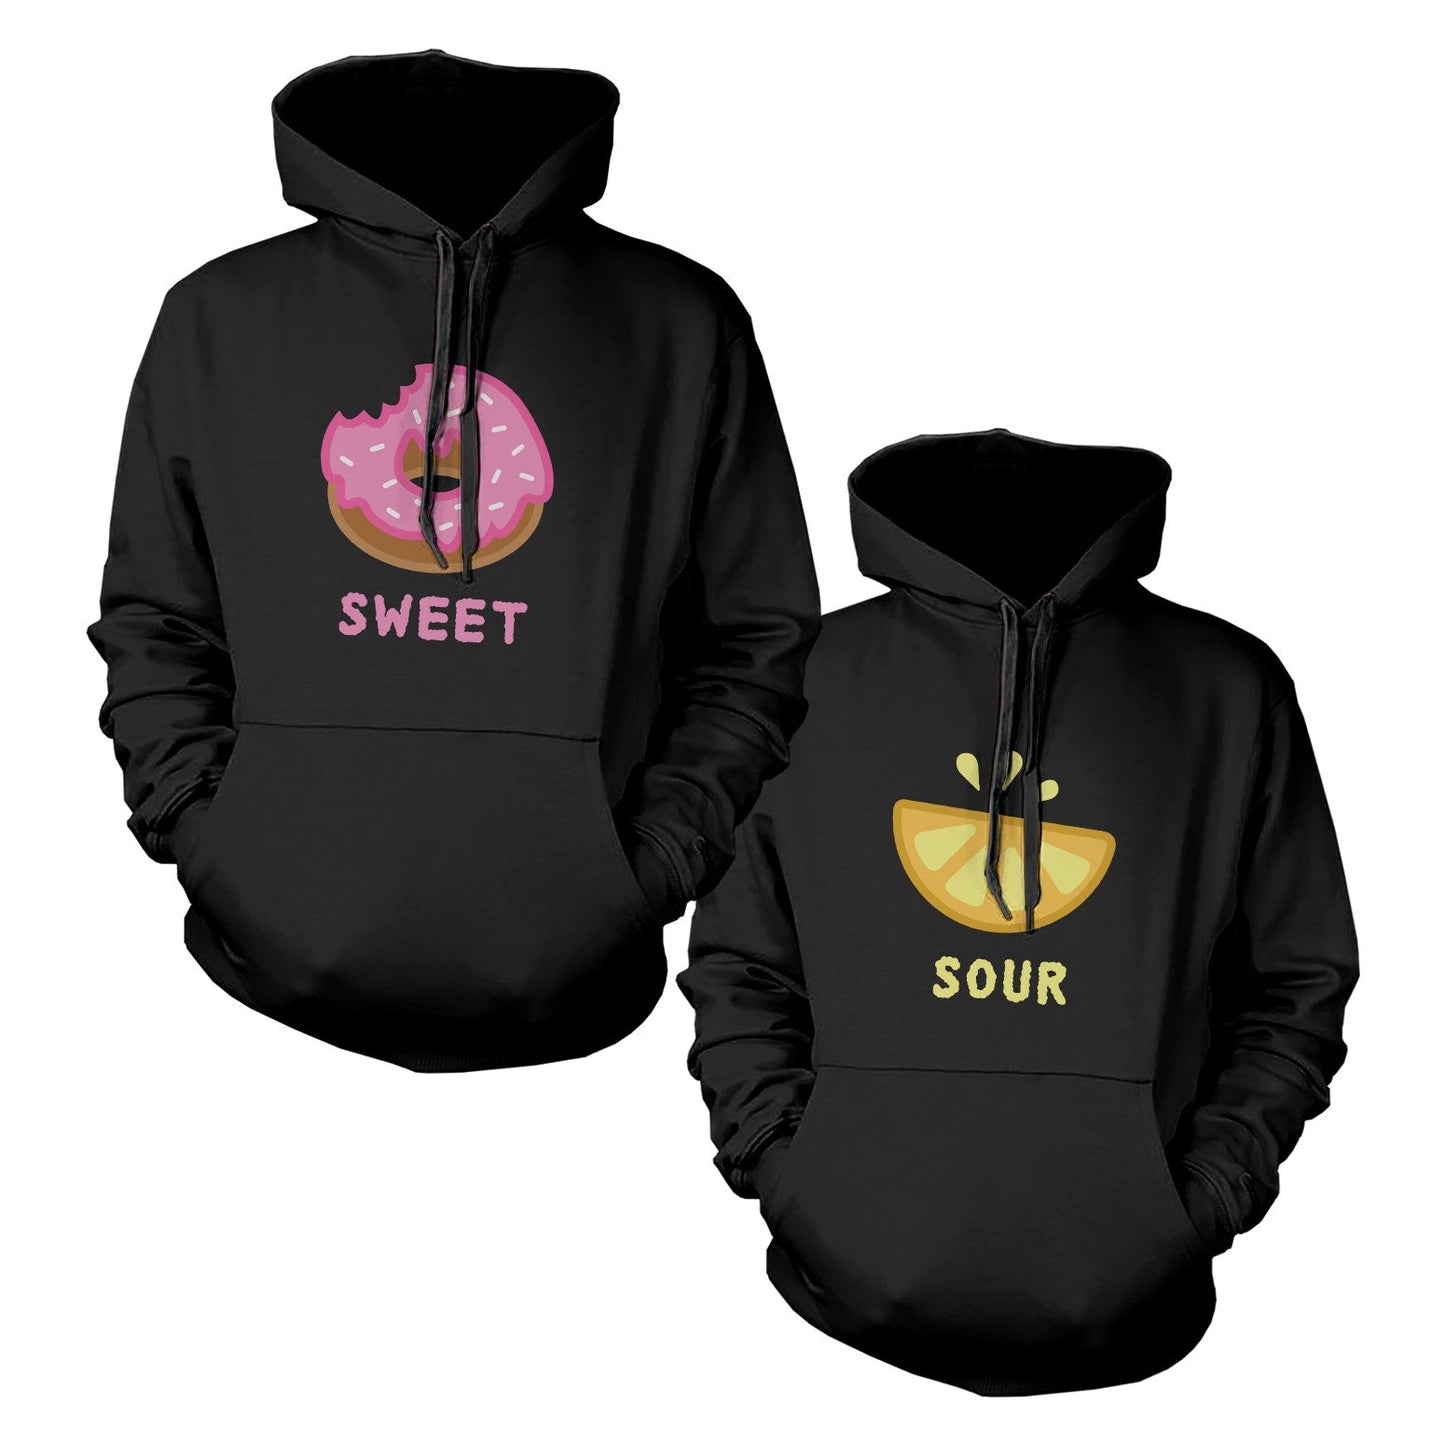 Sweet And Sour Bff Matching Hoodies